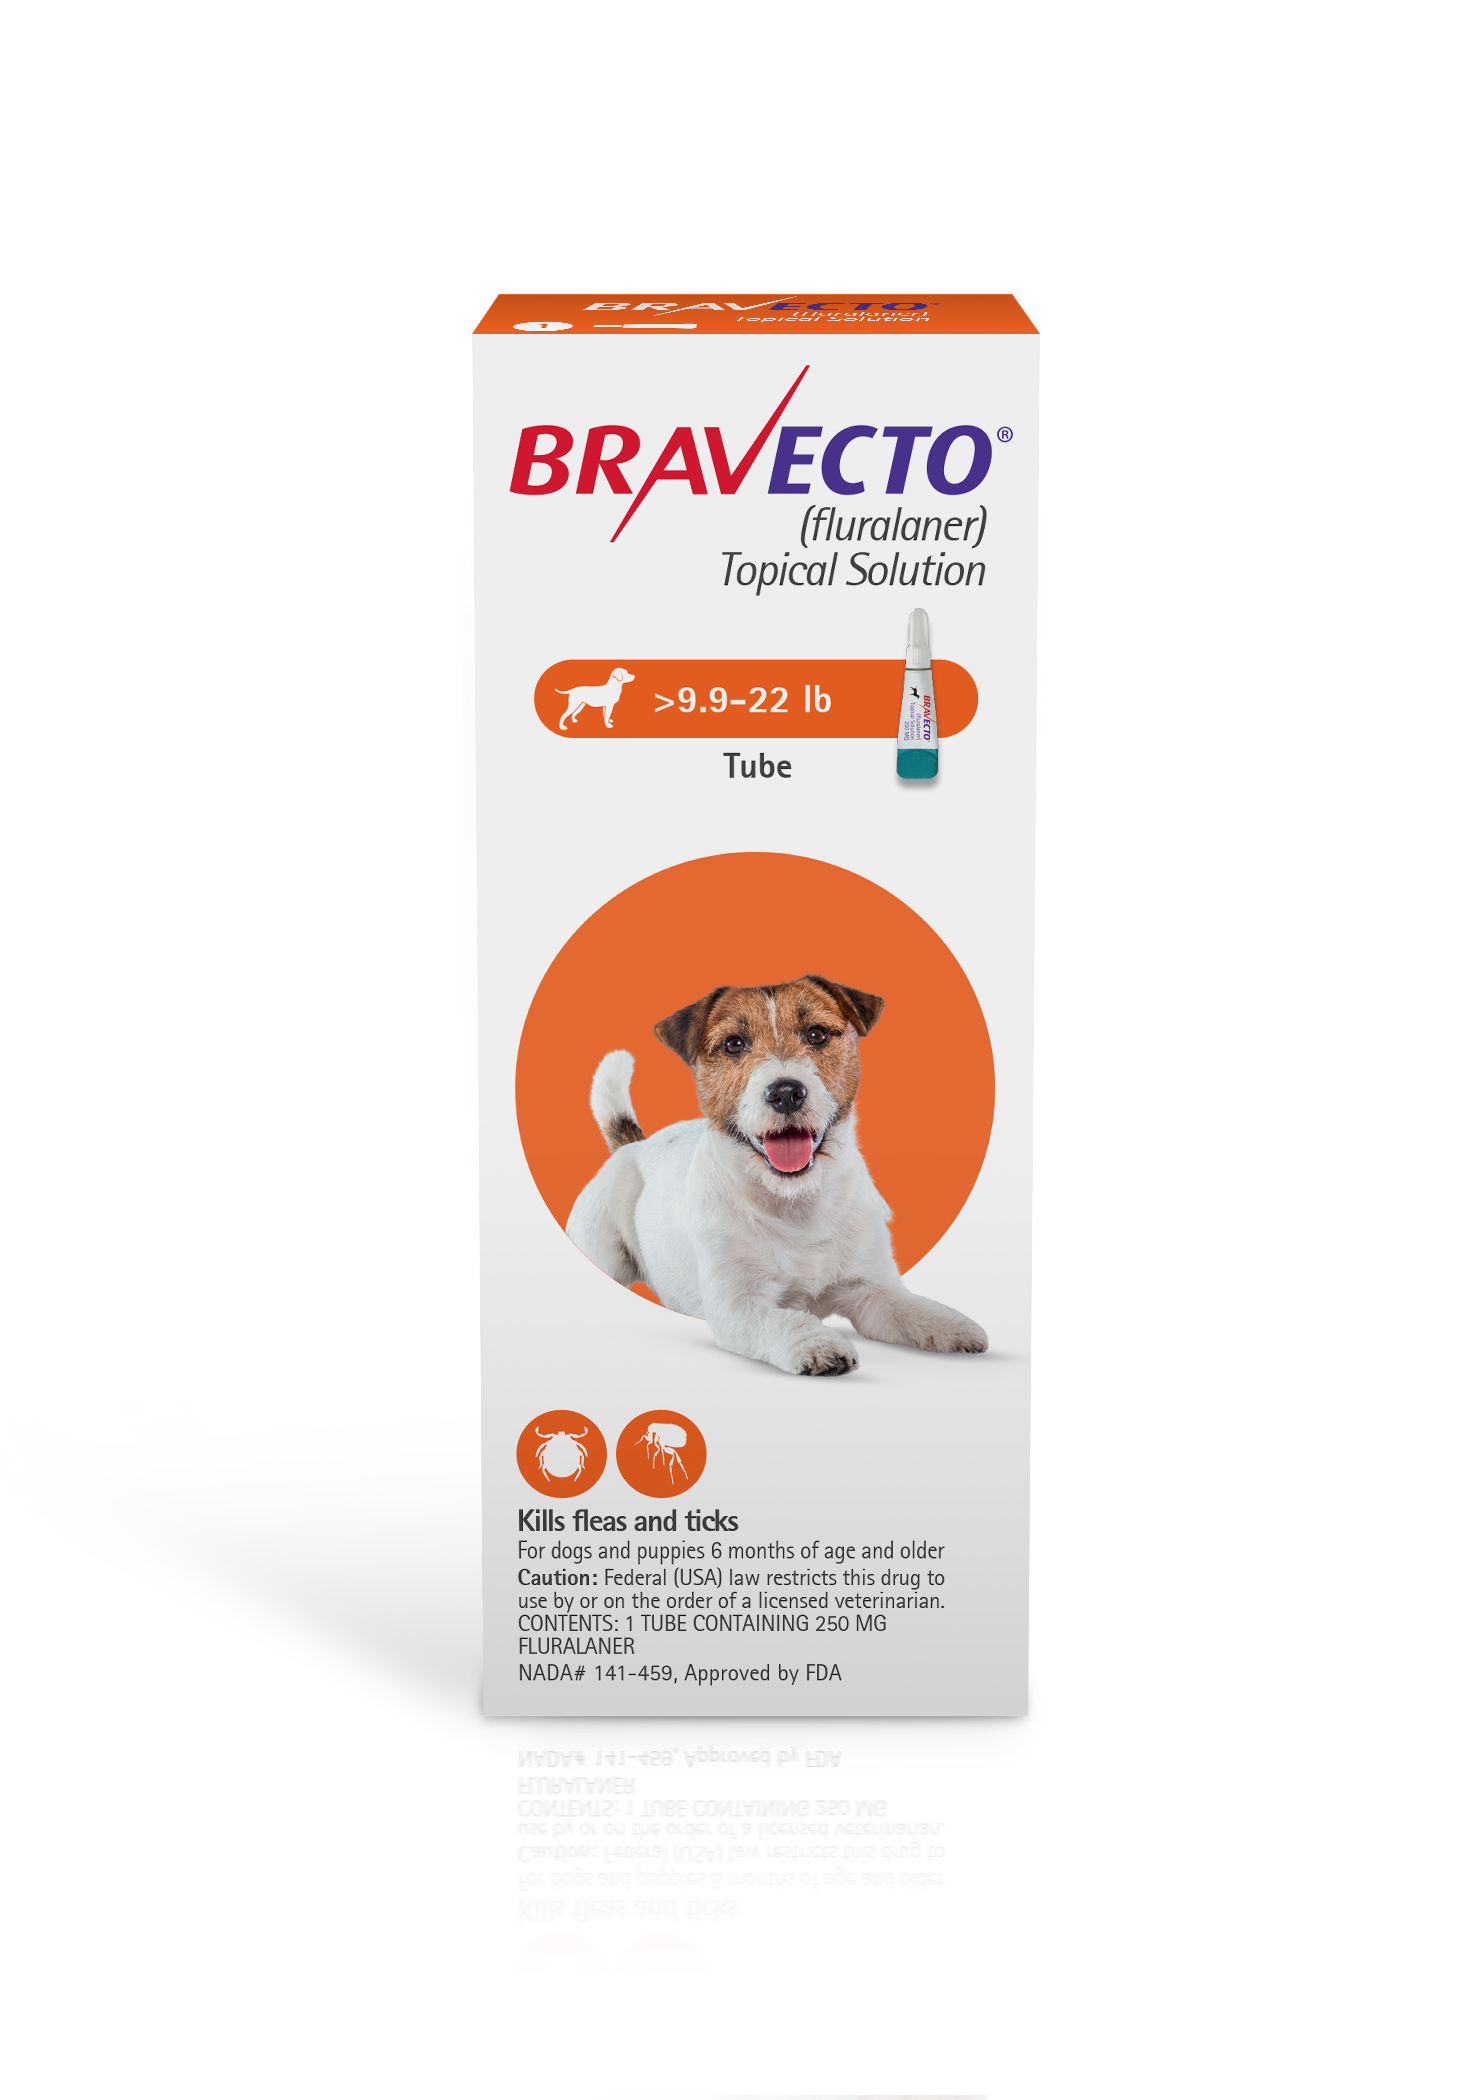 bravecto-topical-solution-for-dogs-lbs-1-tube-ubicaciondepersonas